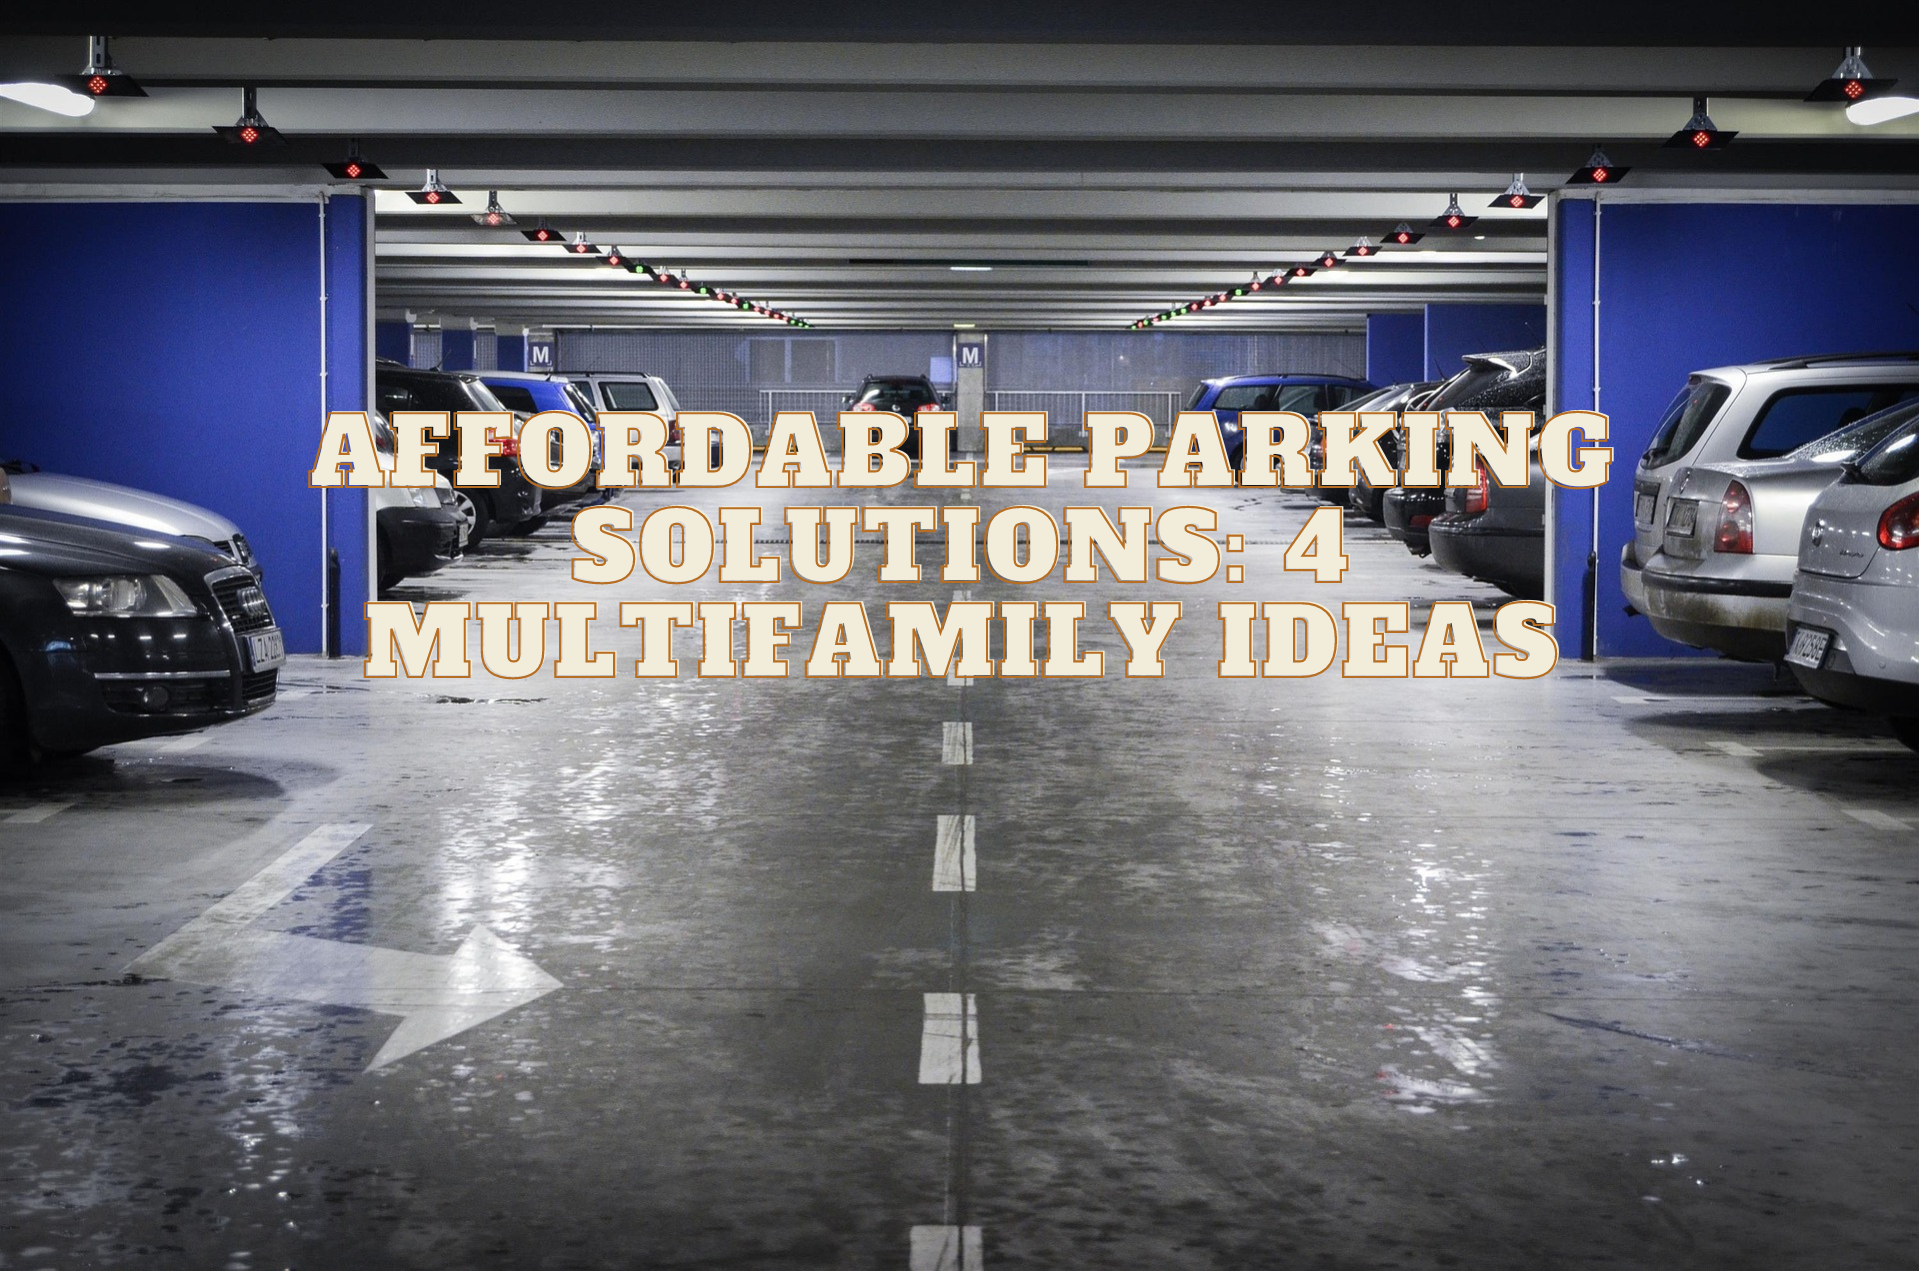 Affordable Parking Solutions 4 Multifamily Ideas